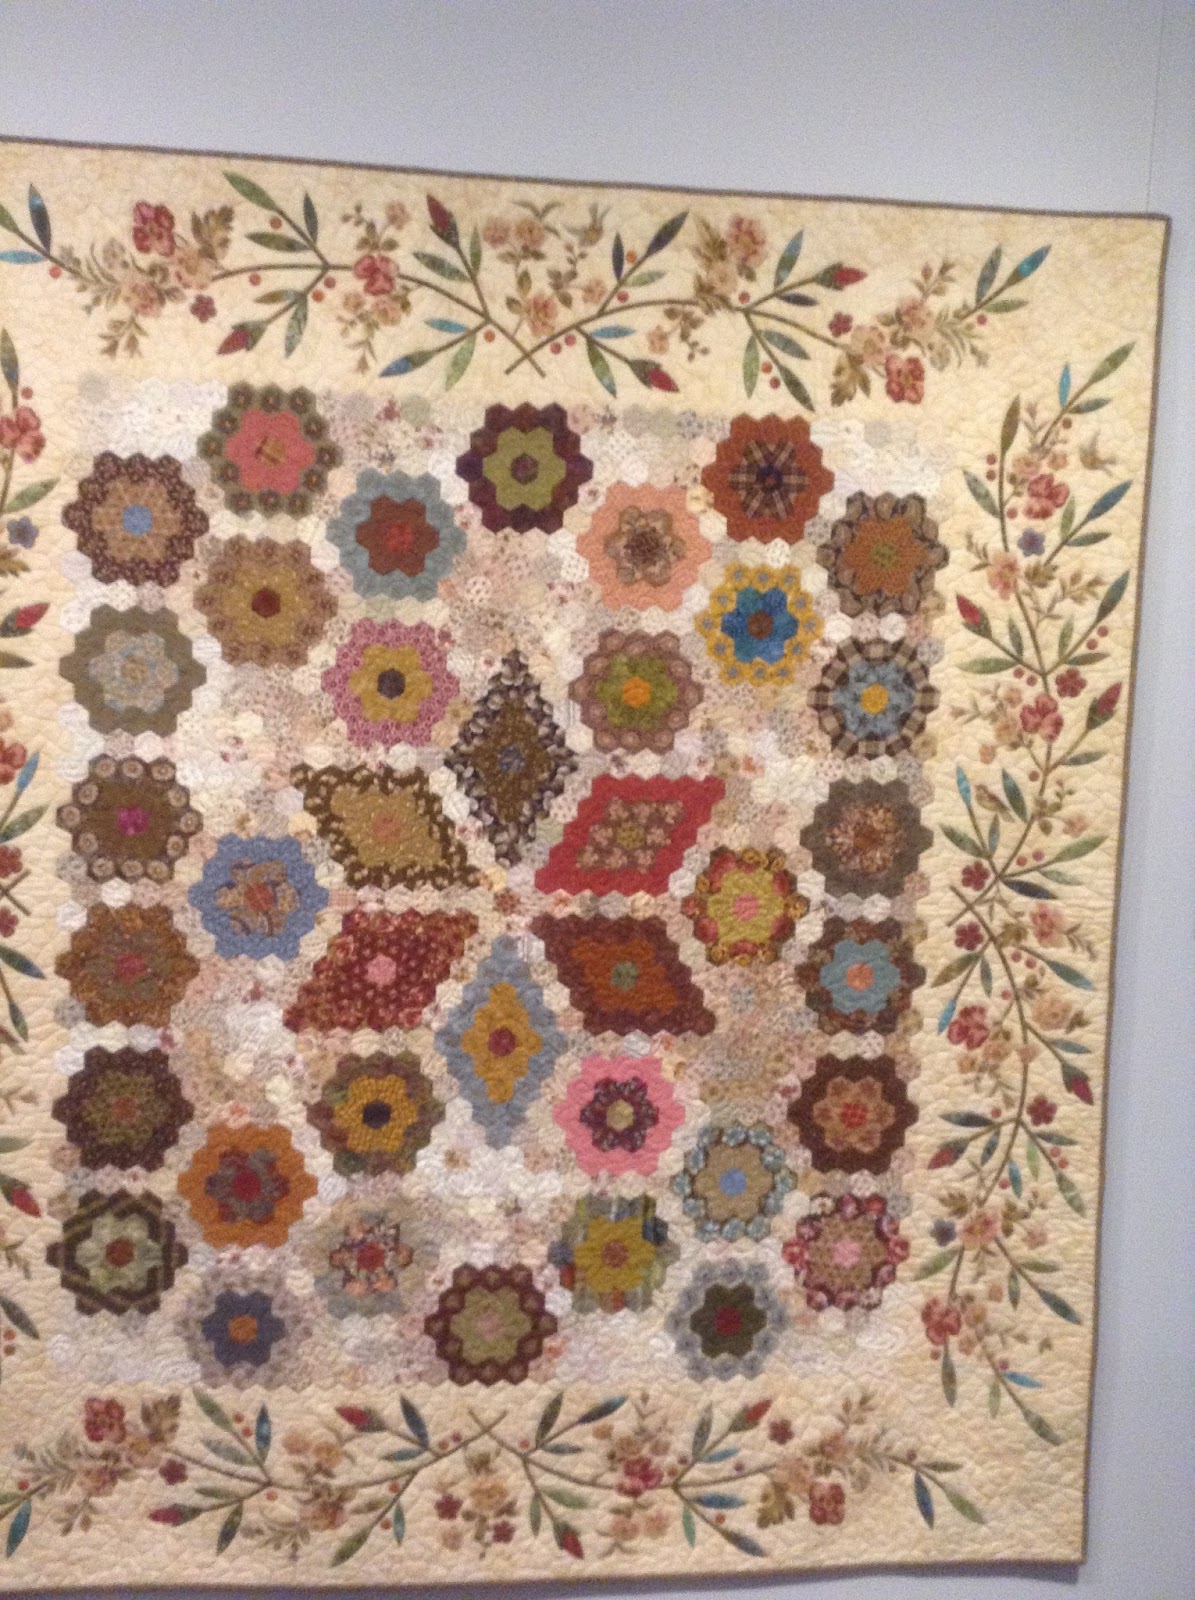 Timeless Traditions International Quilt Study Museum